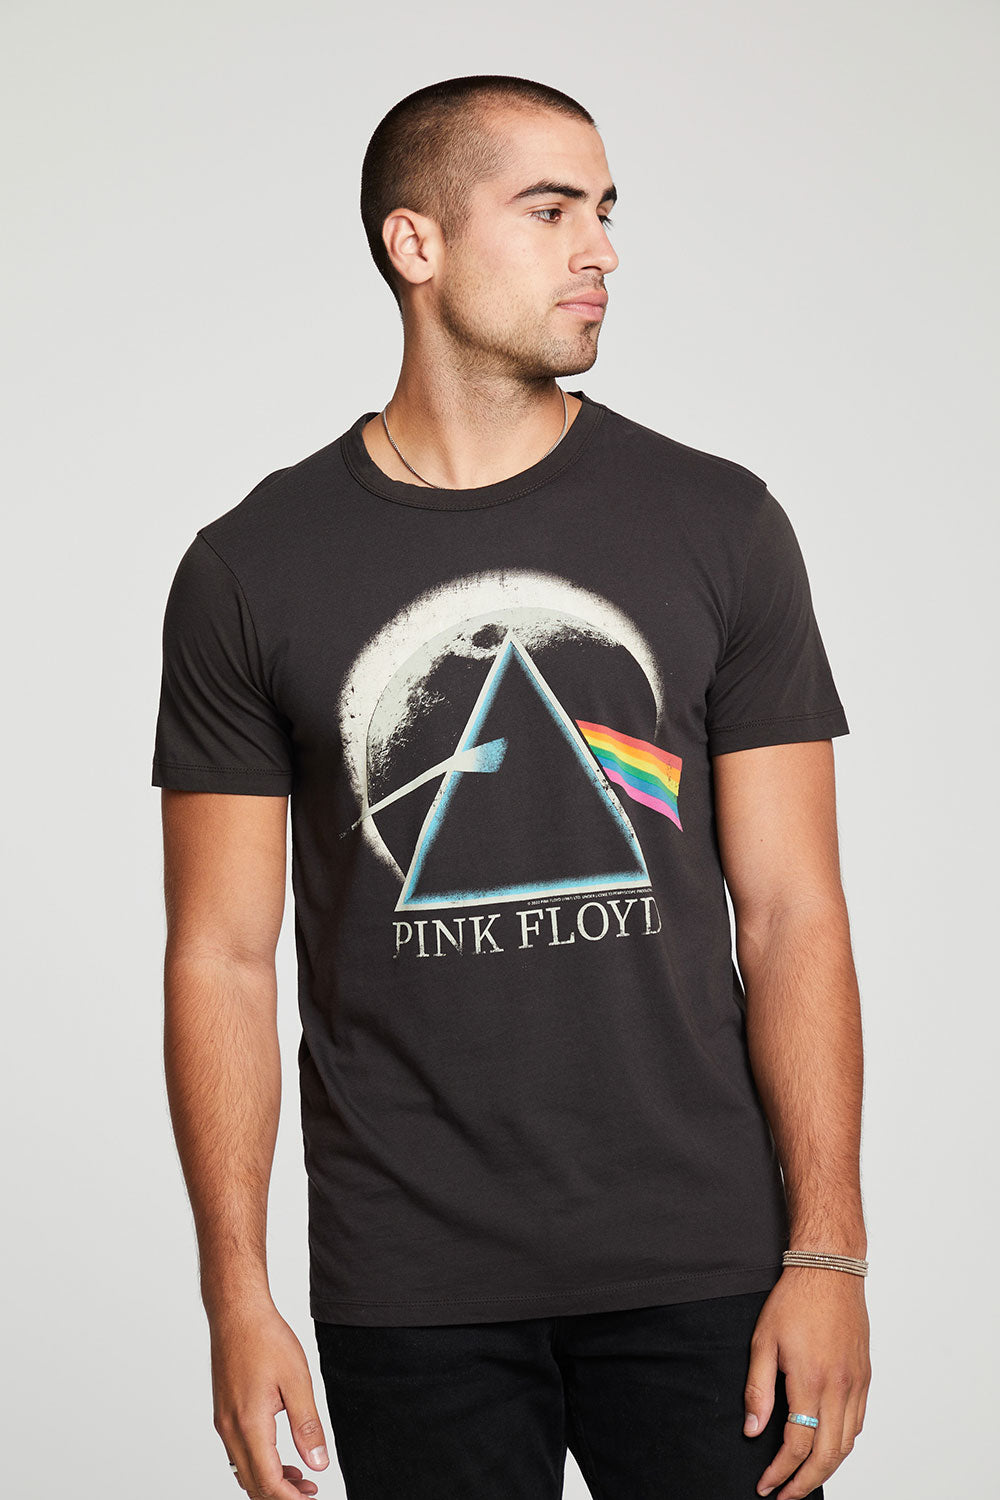 Pink Floyd Dark Side of the Moon Tour MENS chaserbrand